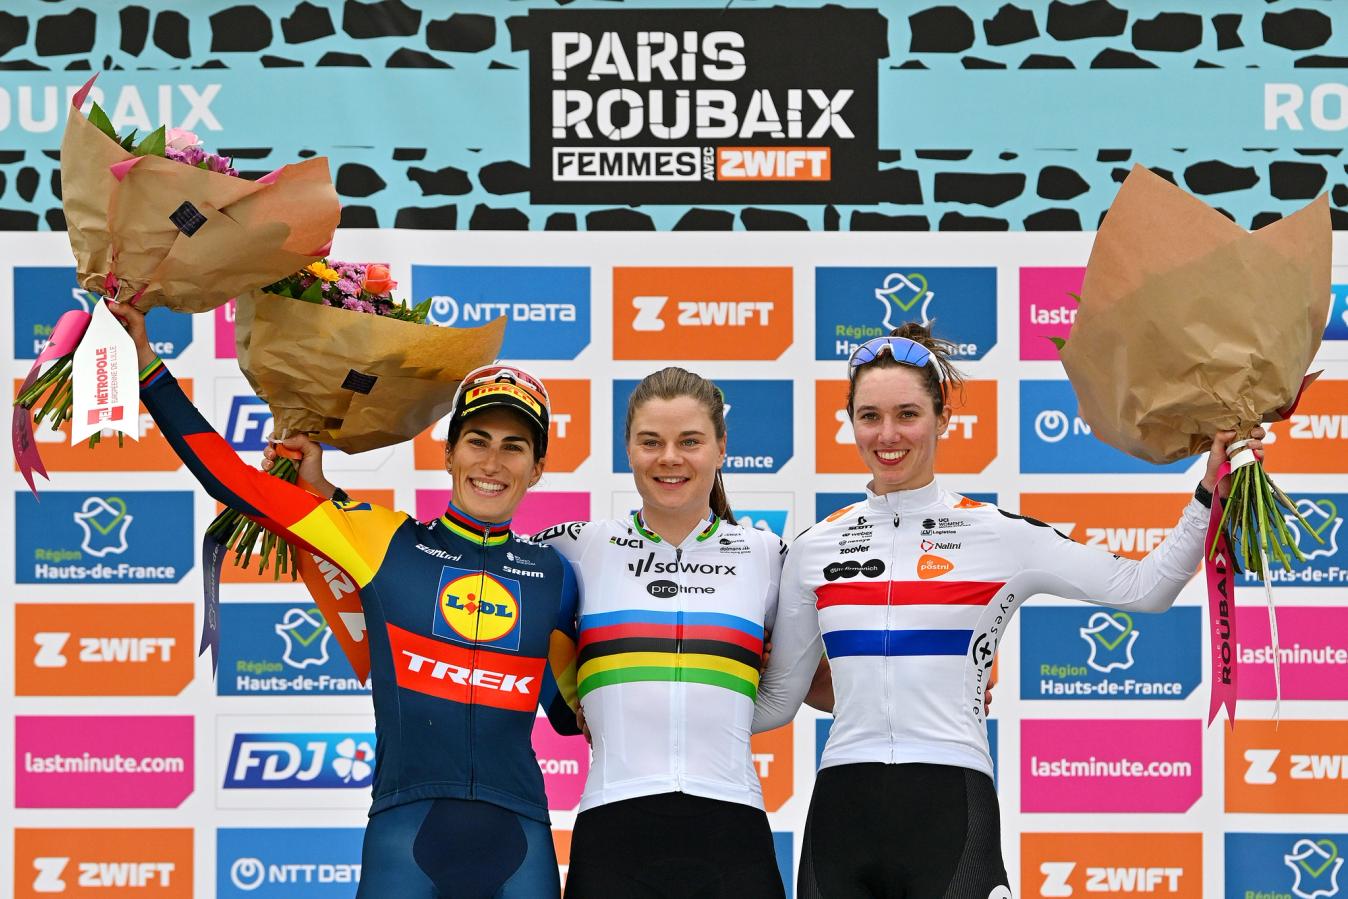 Lotte Kopecky became the first reigning world champion to win Paris-Roubaix Femmes